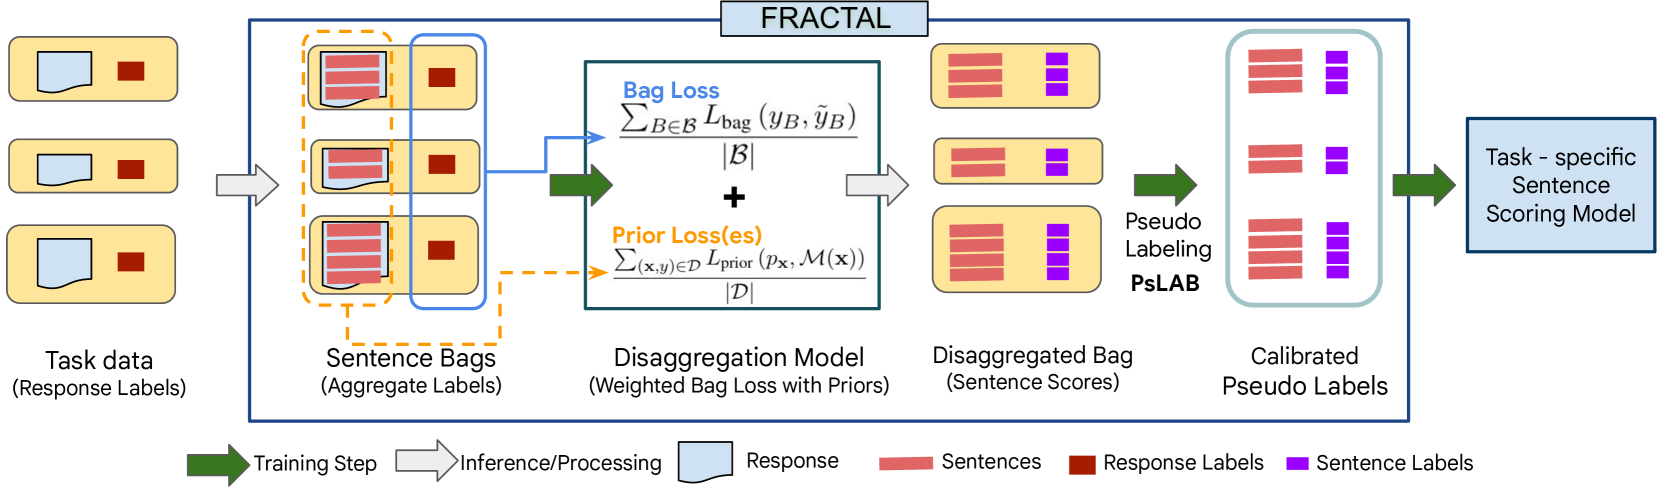 FRACTAL: Fine-Grained Scoring from Aggregate Text Labels